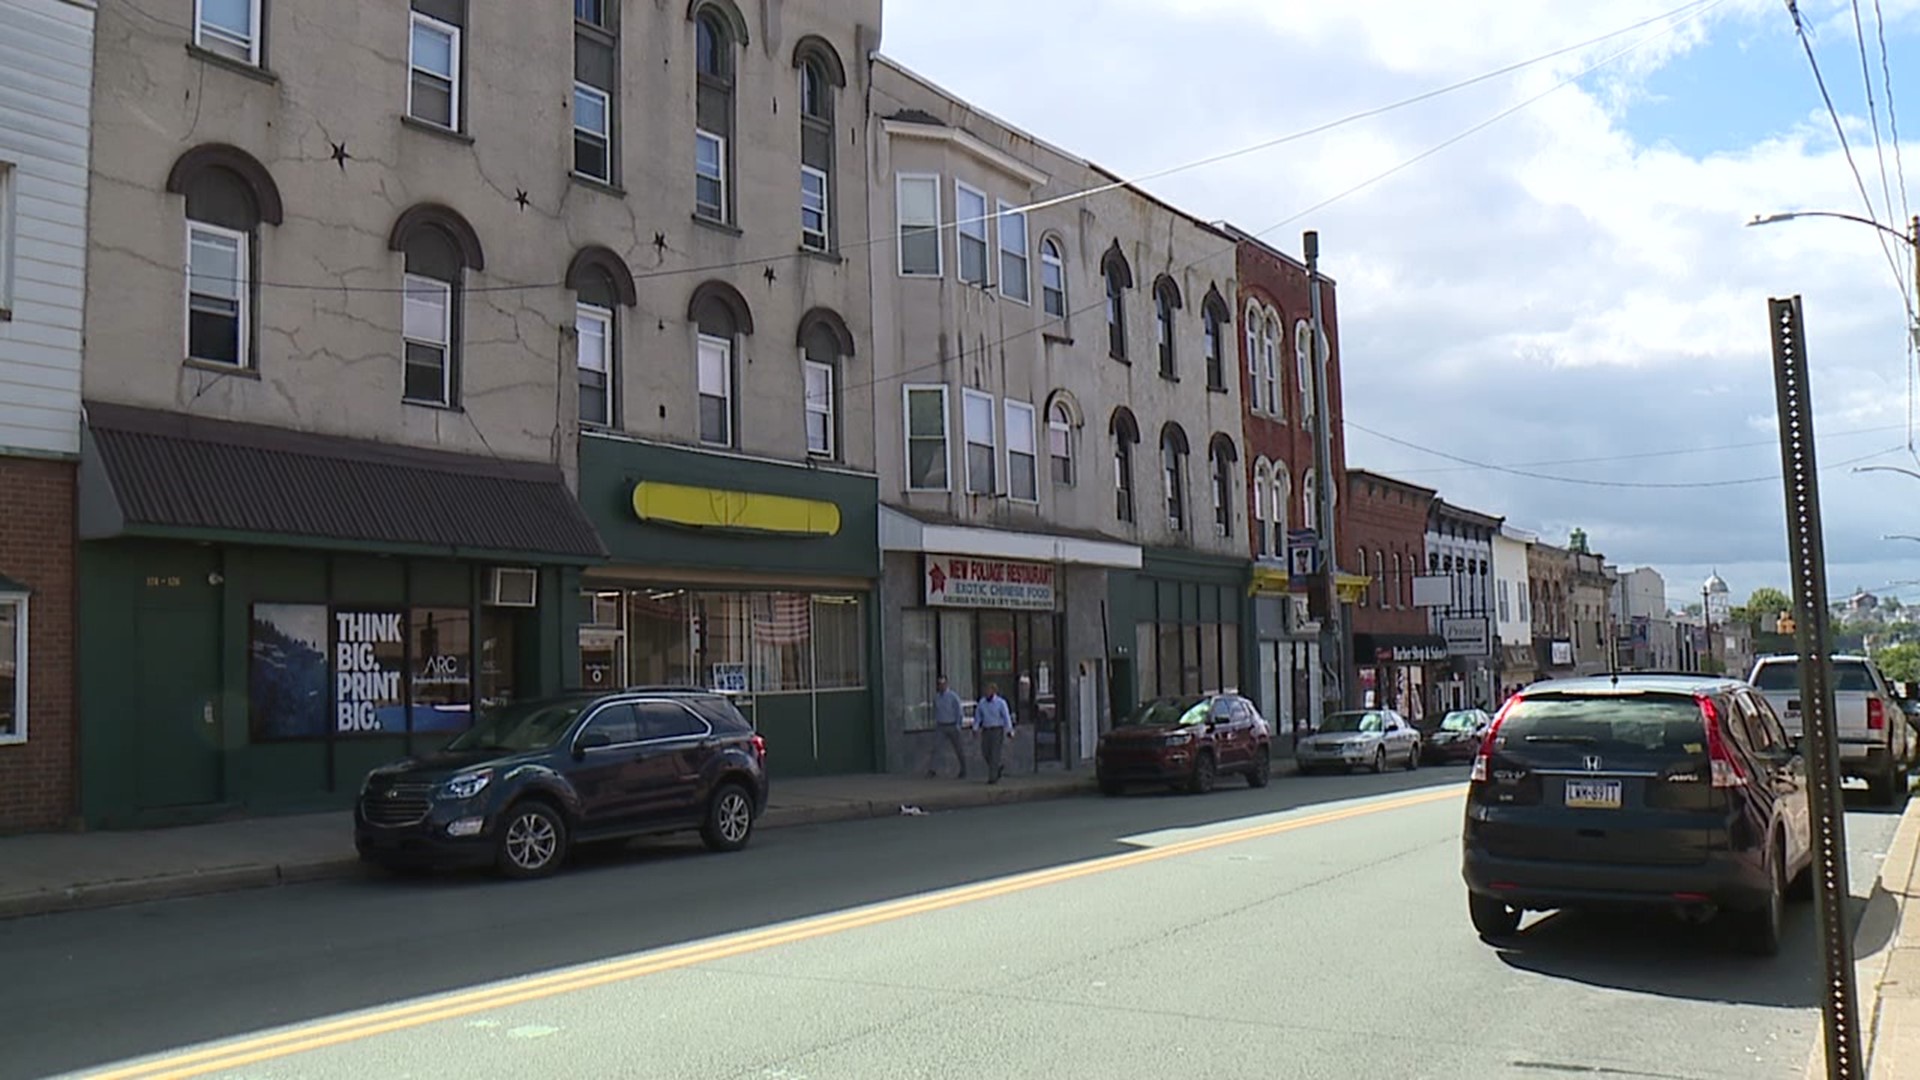 Do you own a business in the city? Want to start one? Then Scranton may be able to help.